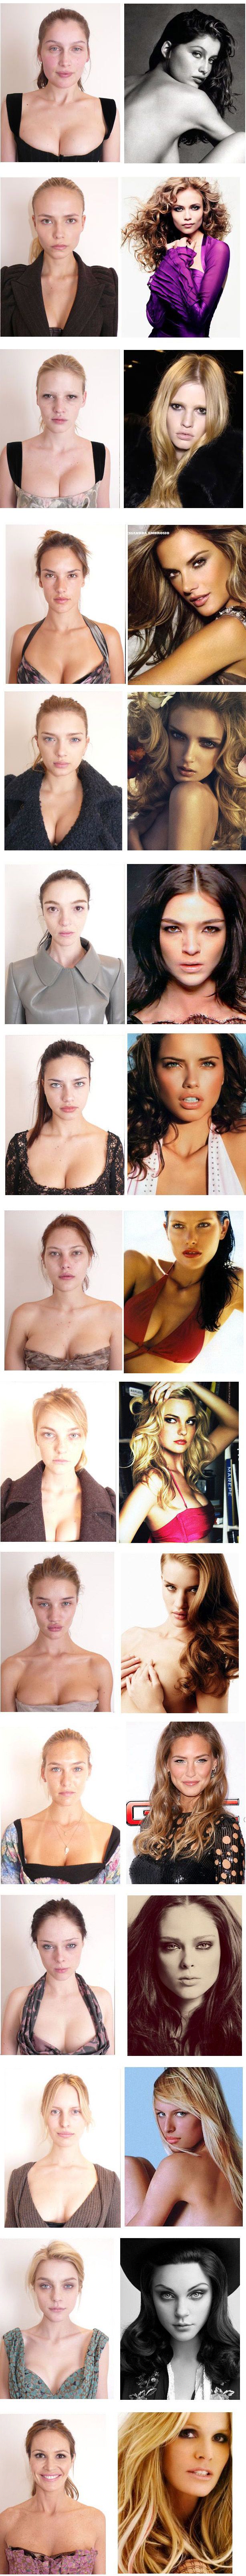 Supermodels without makeup.